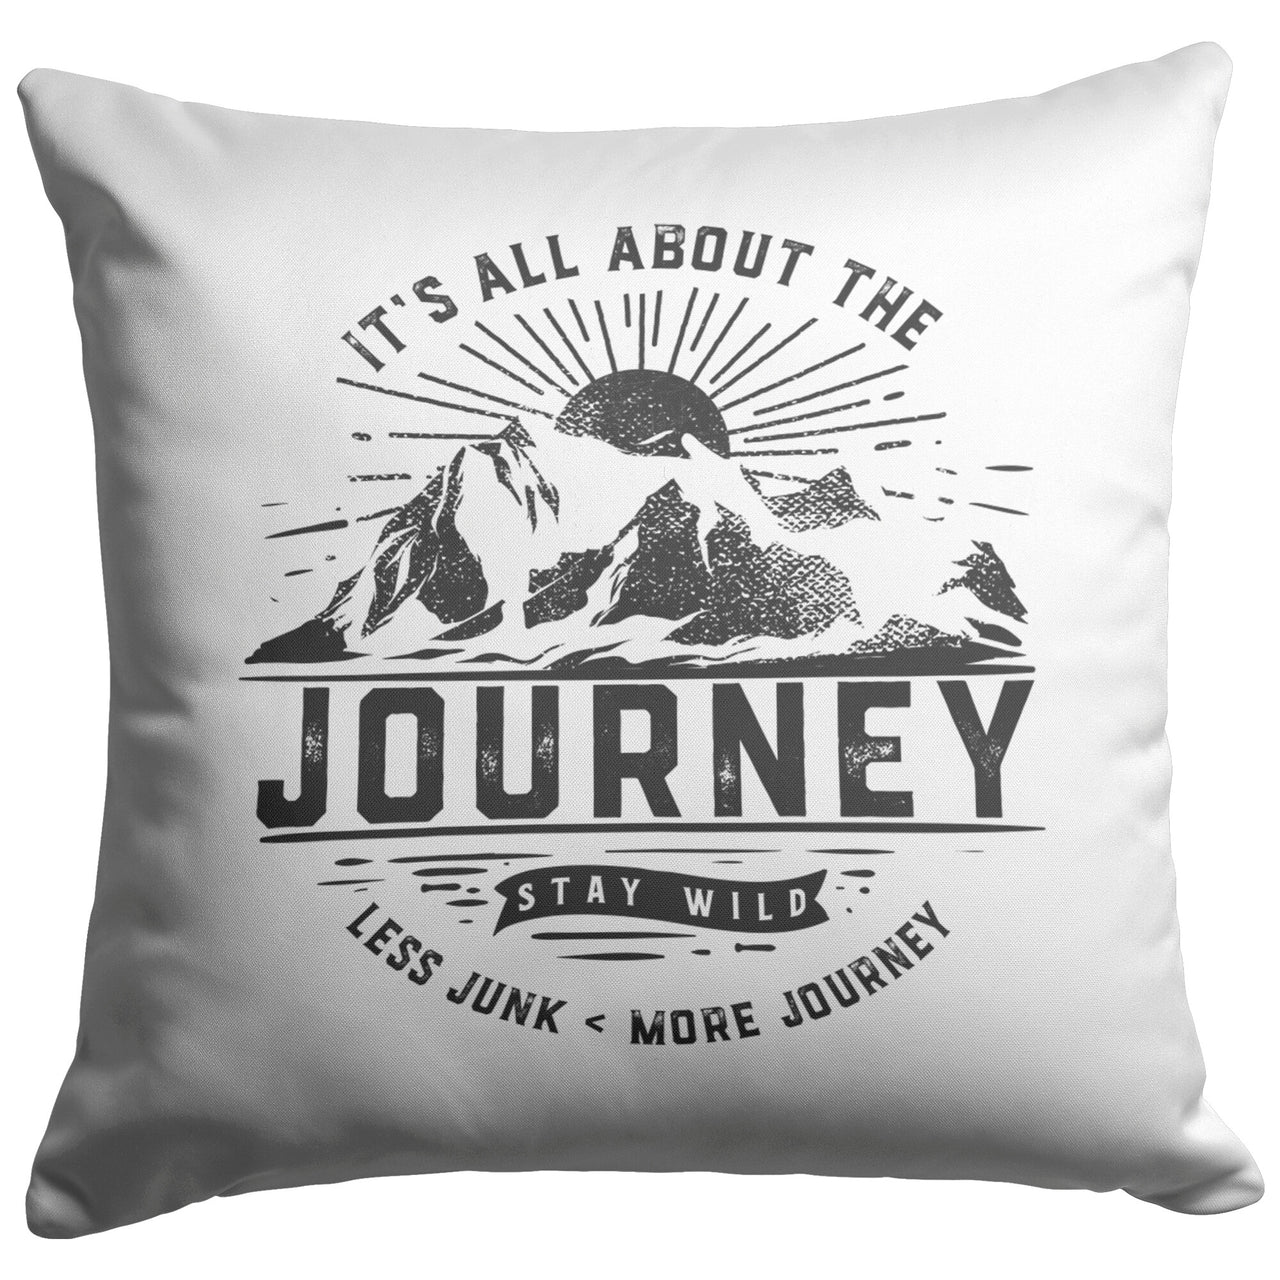 It's All About The Journey White Pillow